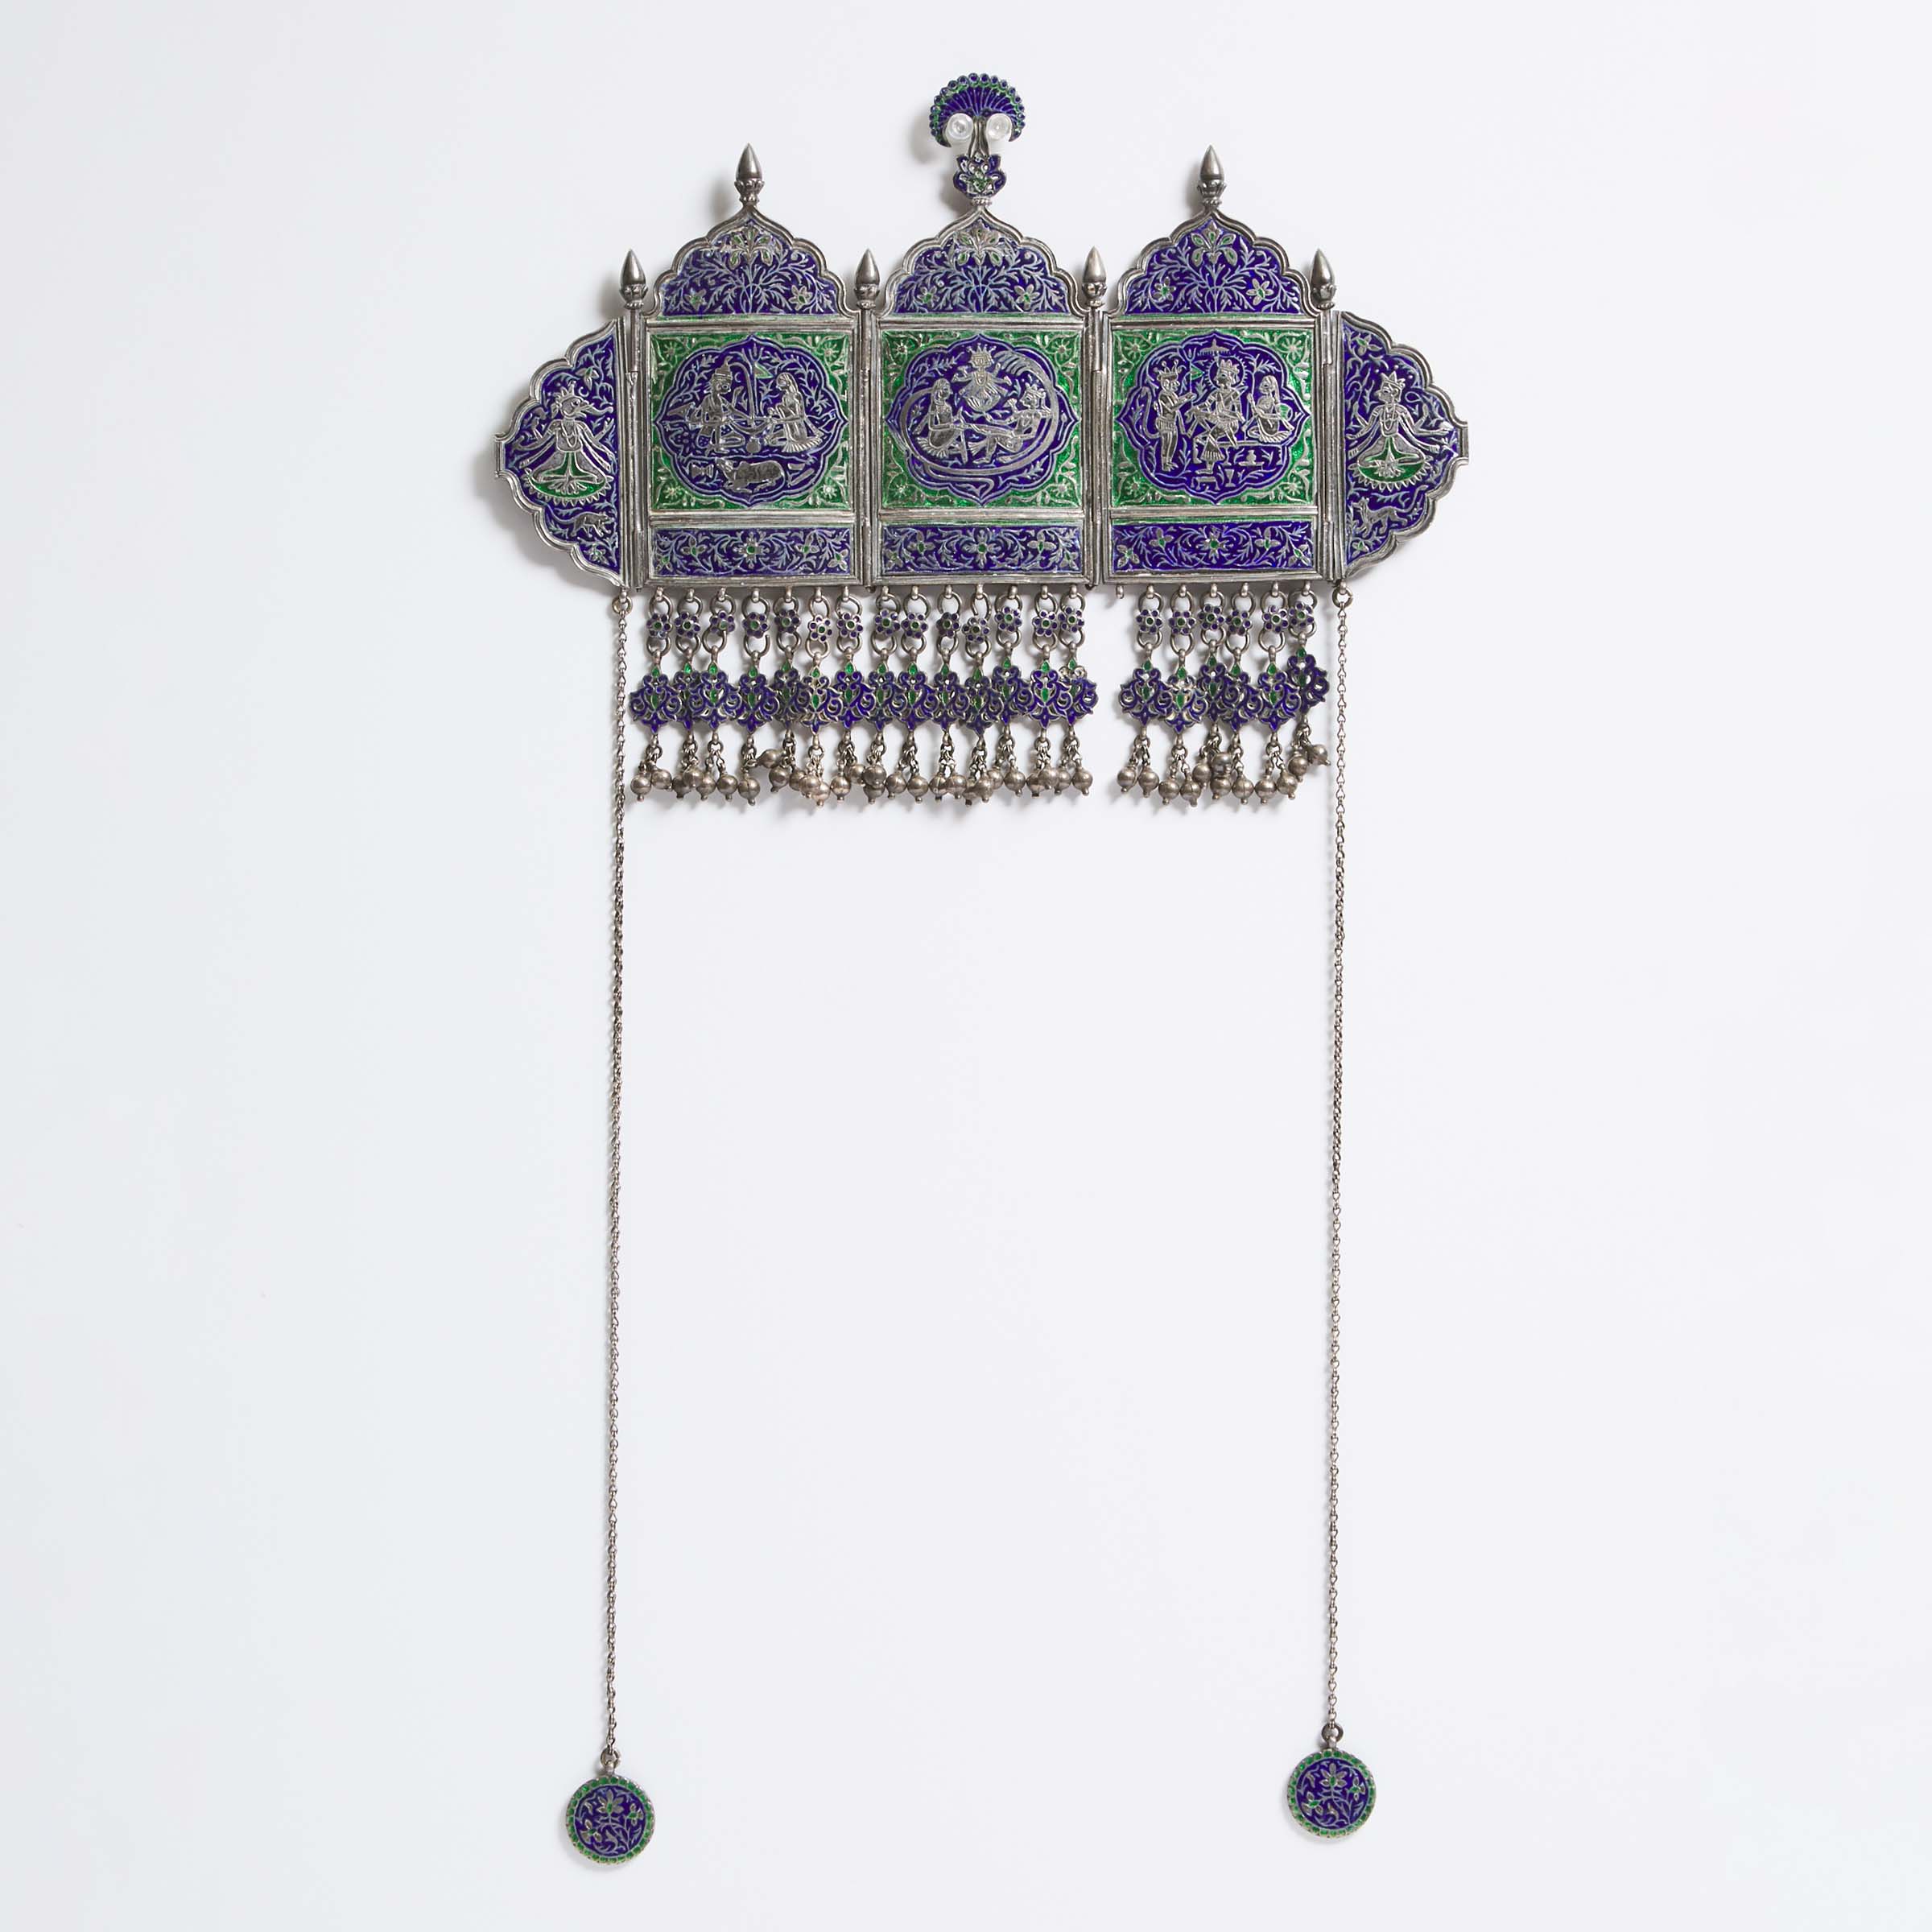 An Indian Blue and Green Enameled